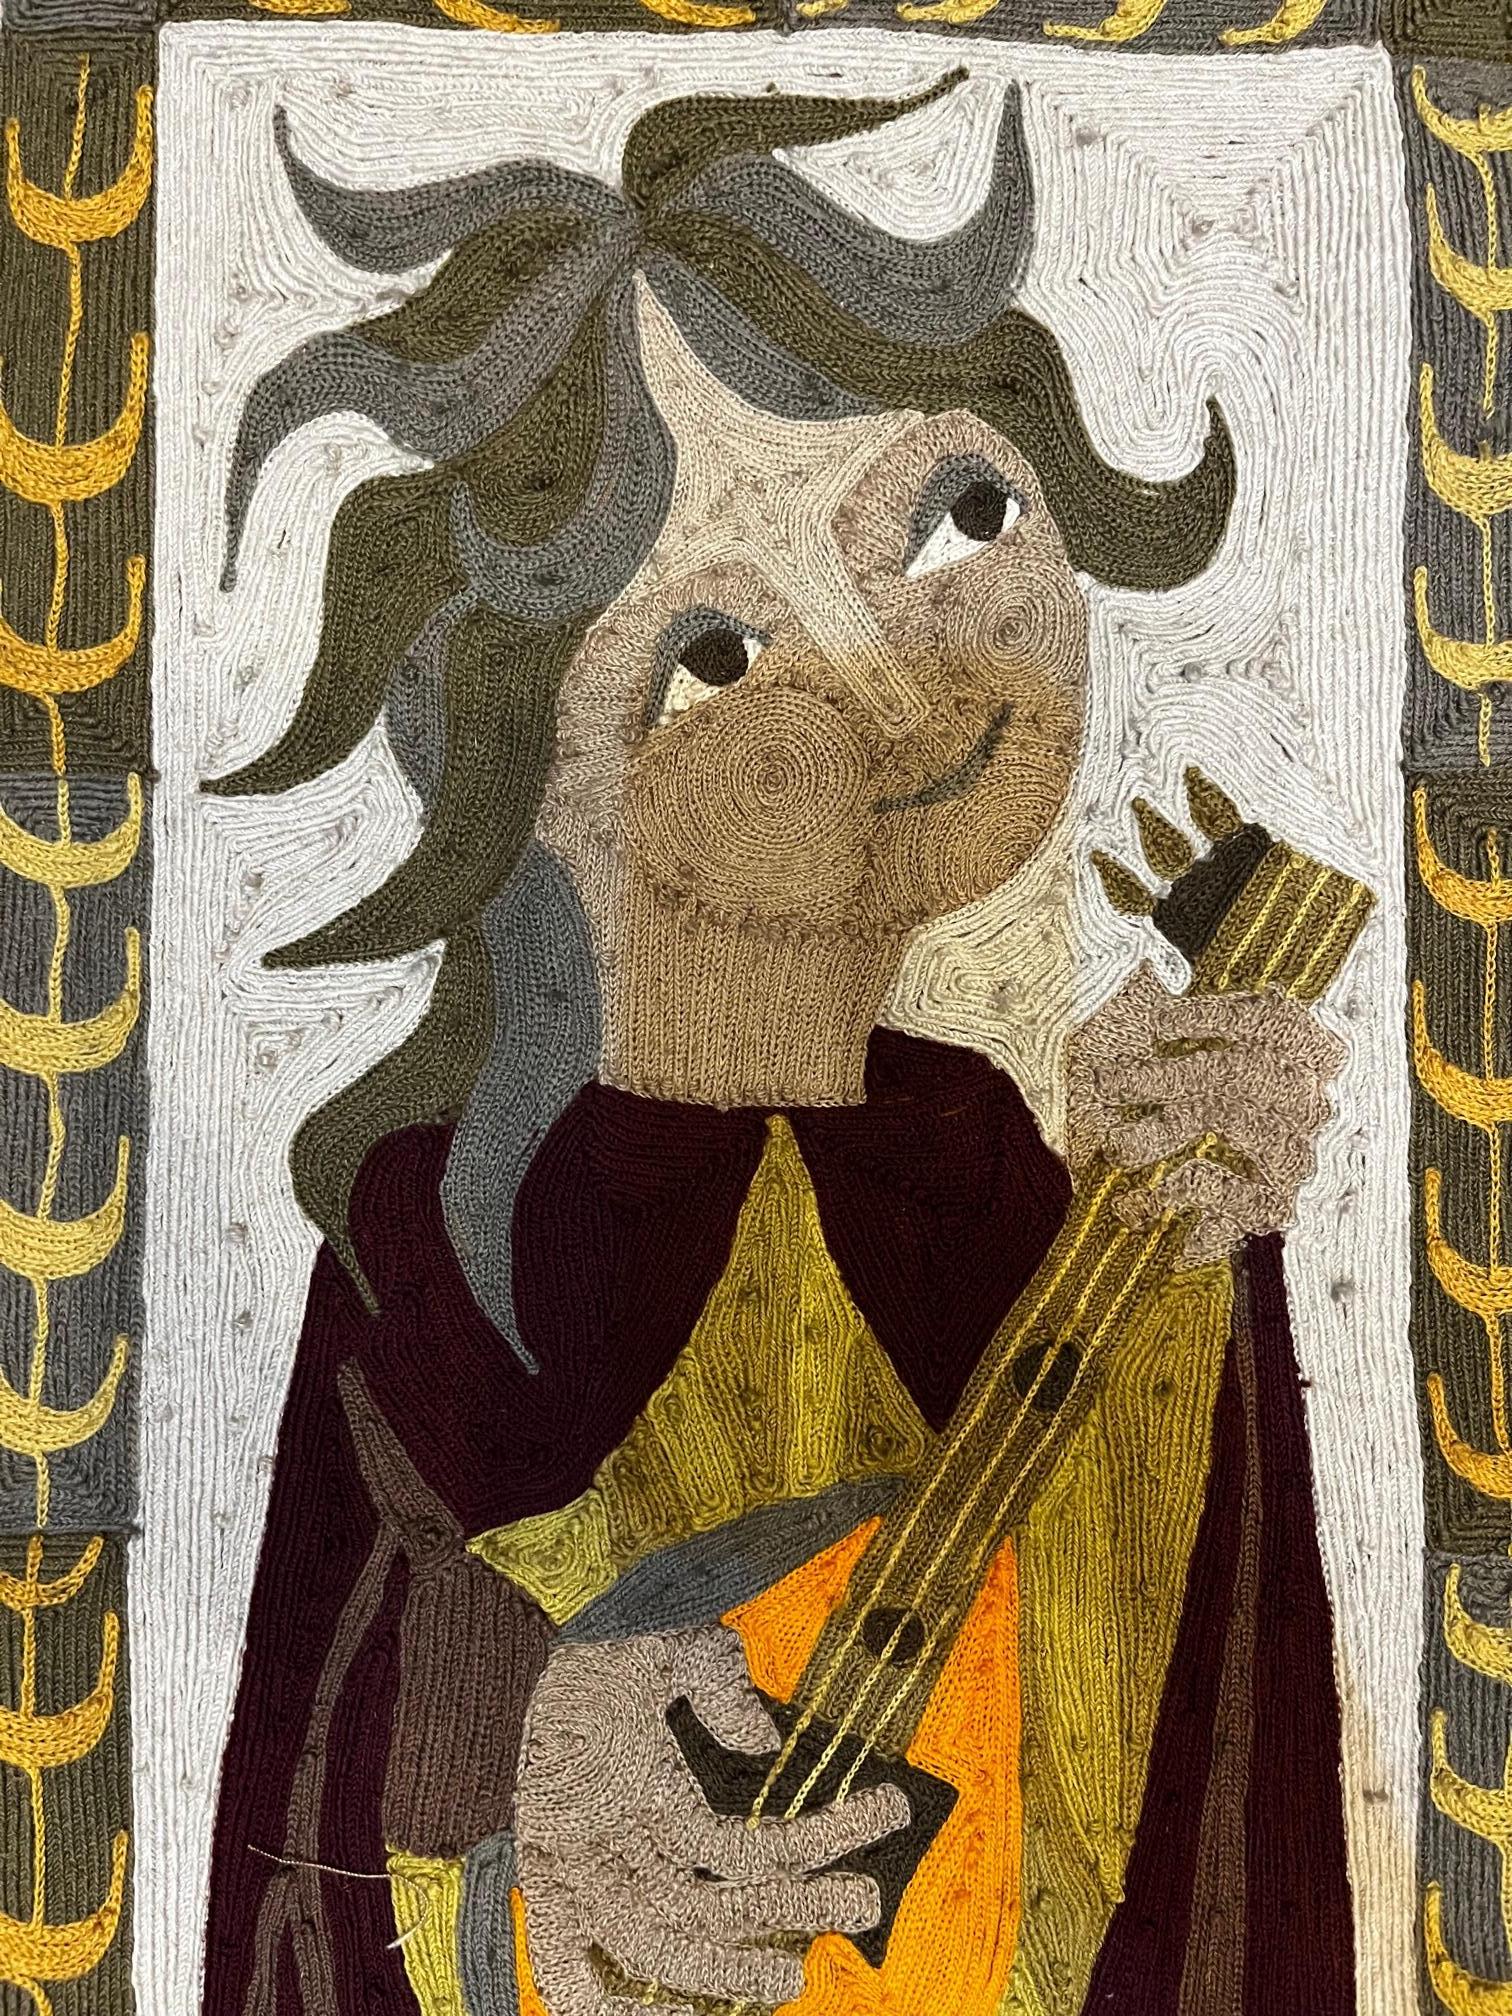 Elisabeth Baillon, Tapestry,
the lute player,
signed with brown thread in the left corner,
cotton,
circa 1960, France.
Good condition.
Height 62 cm, width 30 cm, depth 1 mm.